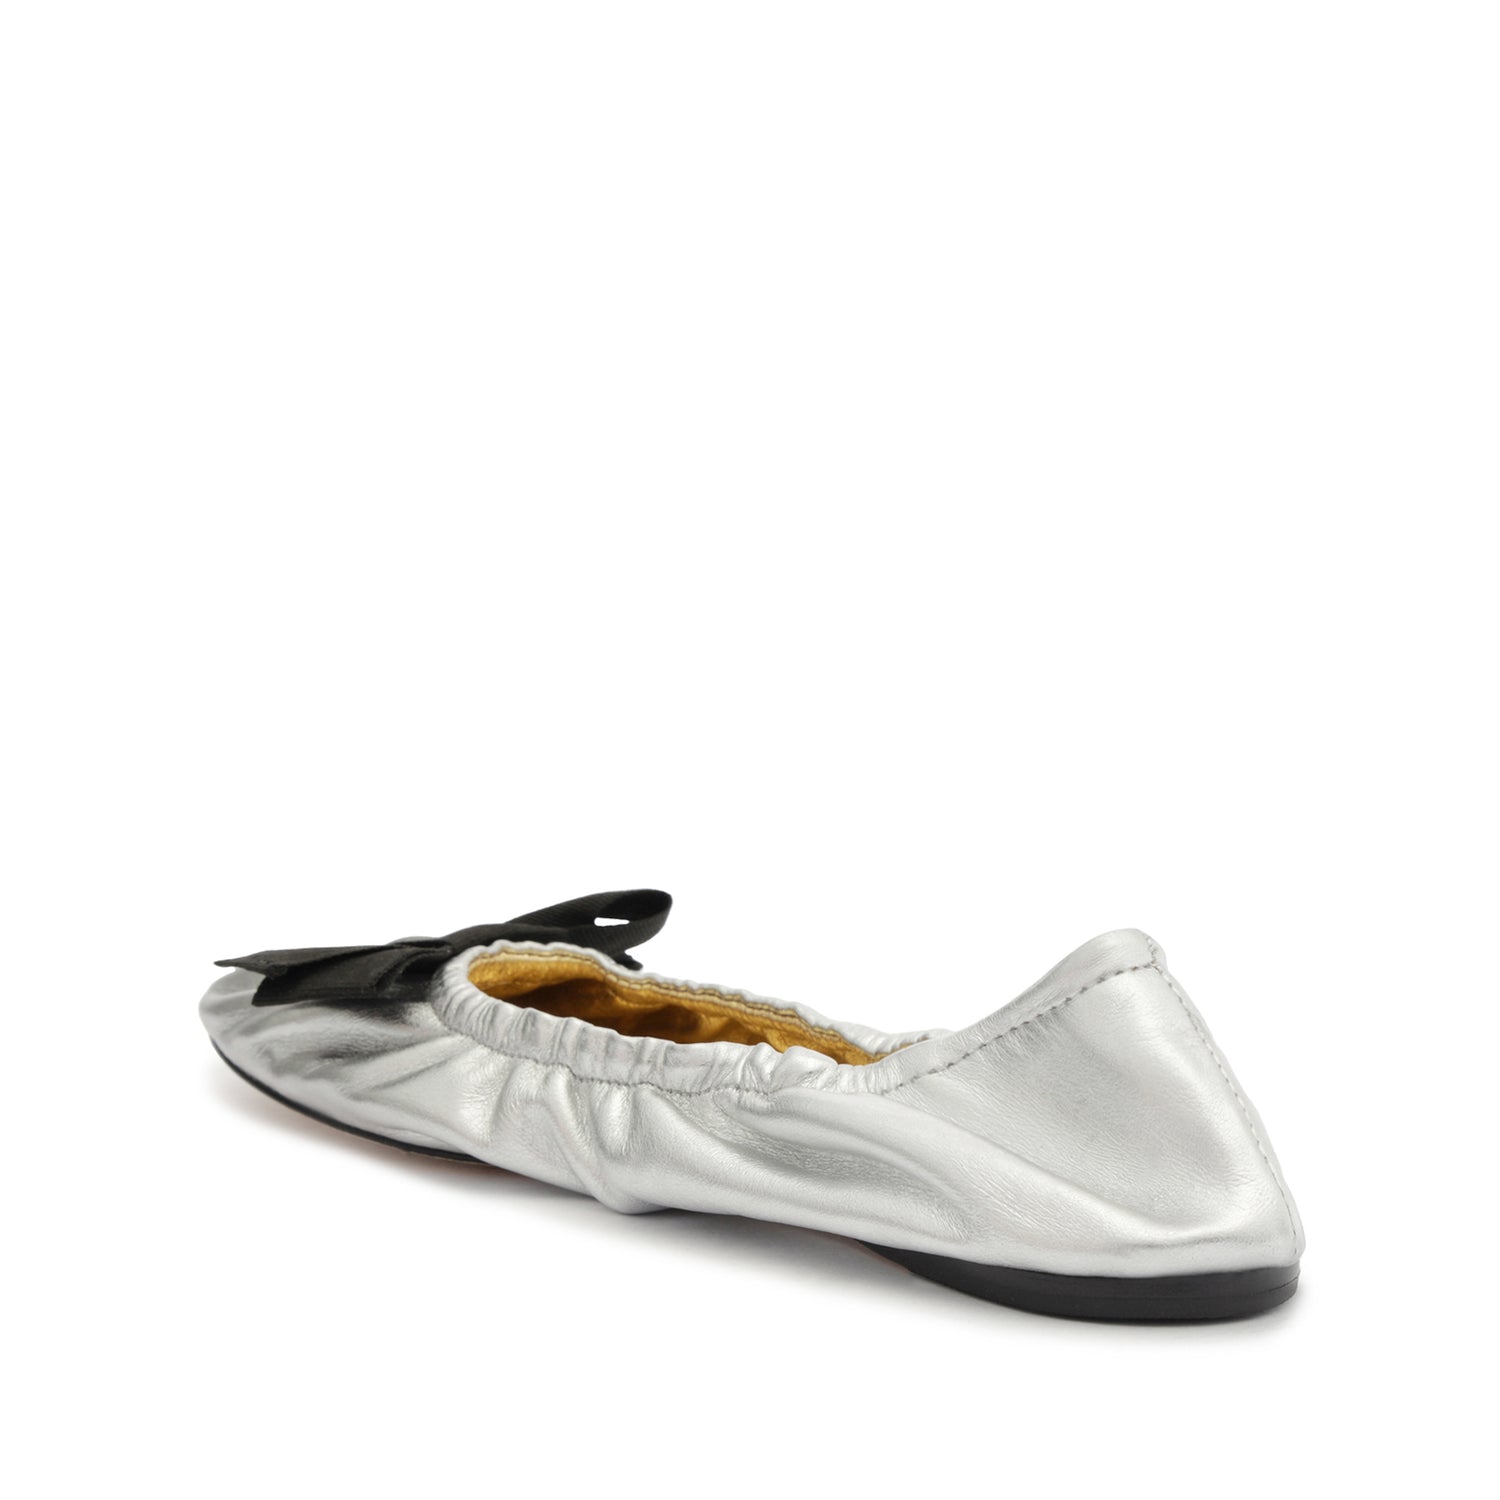 Suzanne Leather Flat Flats Fall 23    - Schutz Shoes